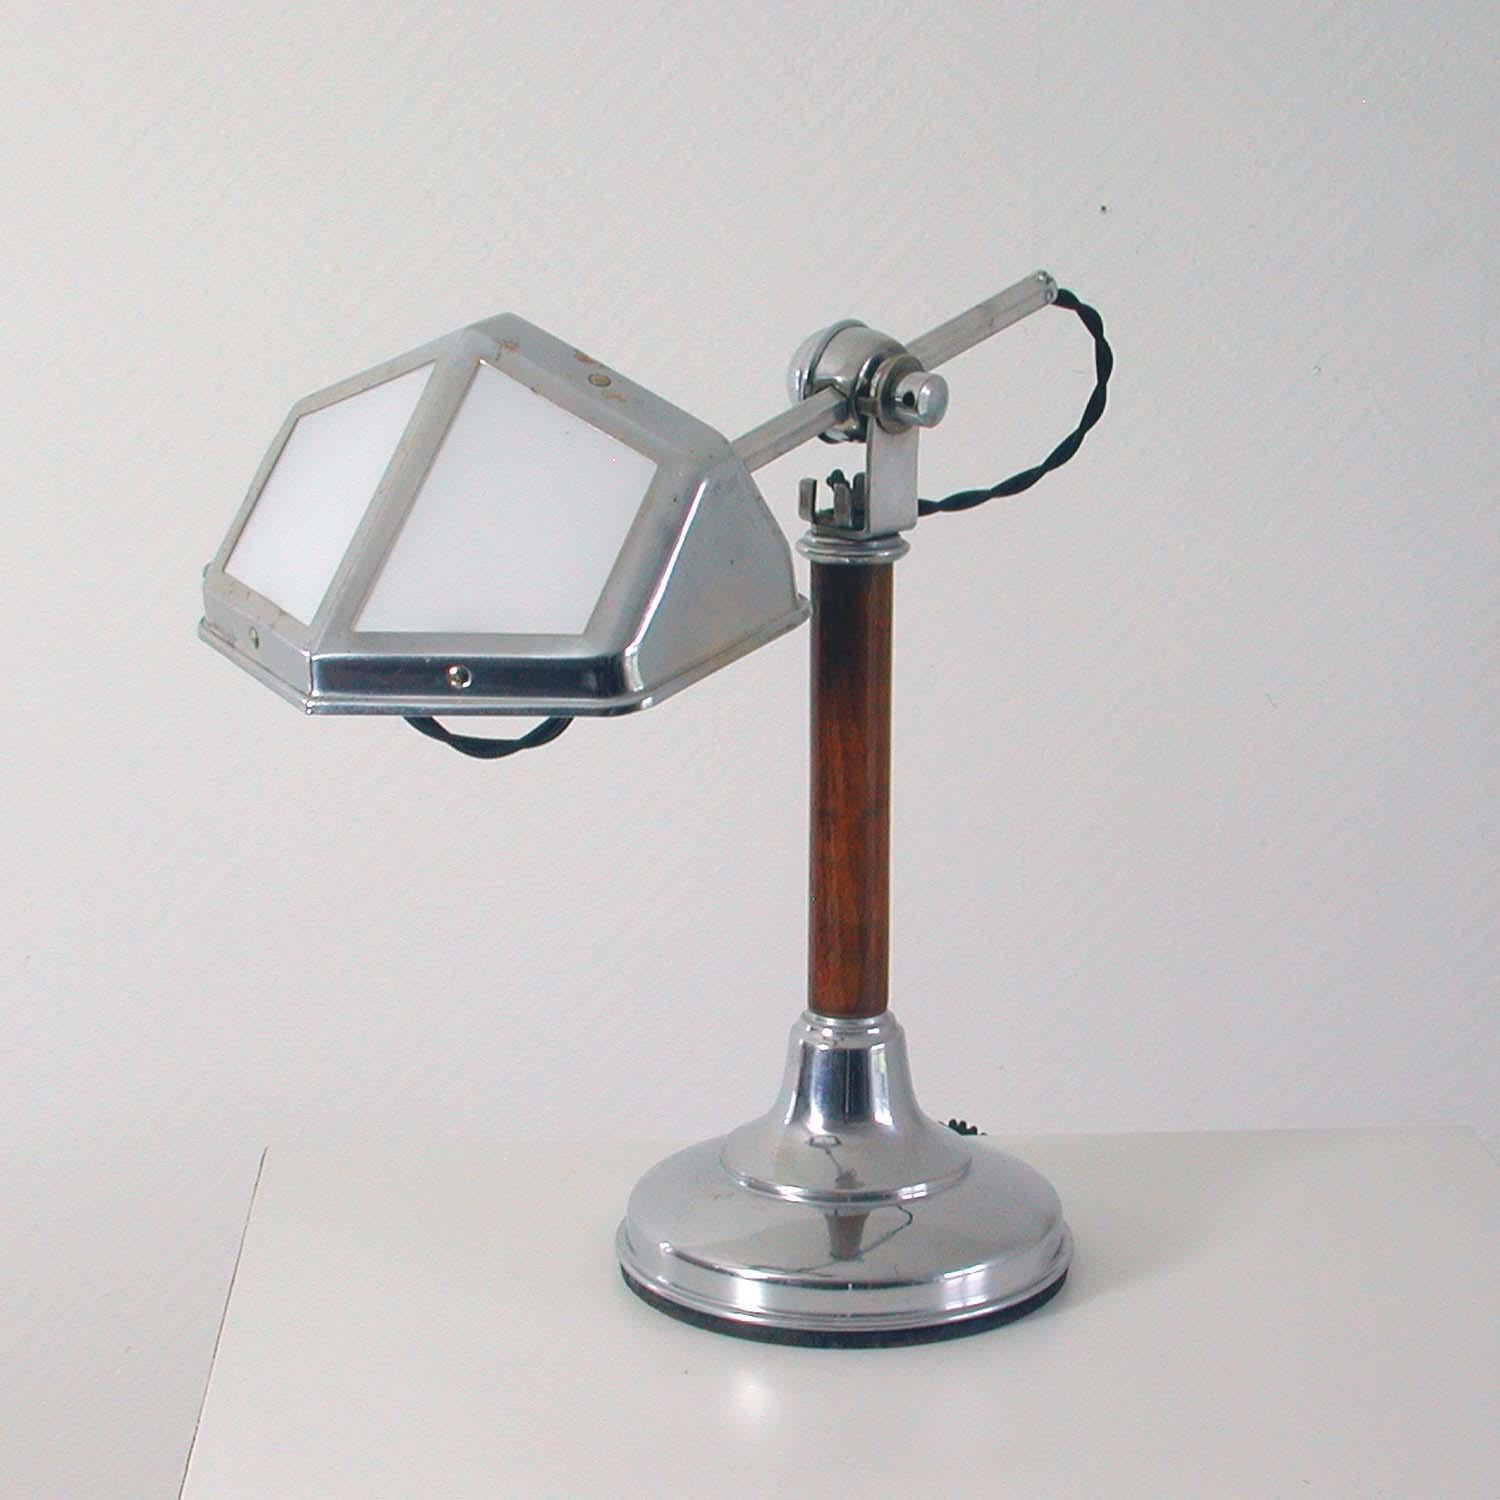 This elegant vintage Pirouette table lamp was manufactured in the French city of Nice in the 1920s during the Art Deco period.

The lamp is made of chrome-plated metal and walnut and has got an adjustable lamp arm and adjustable shade with white